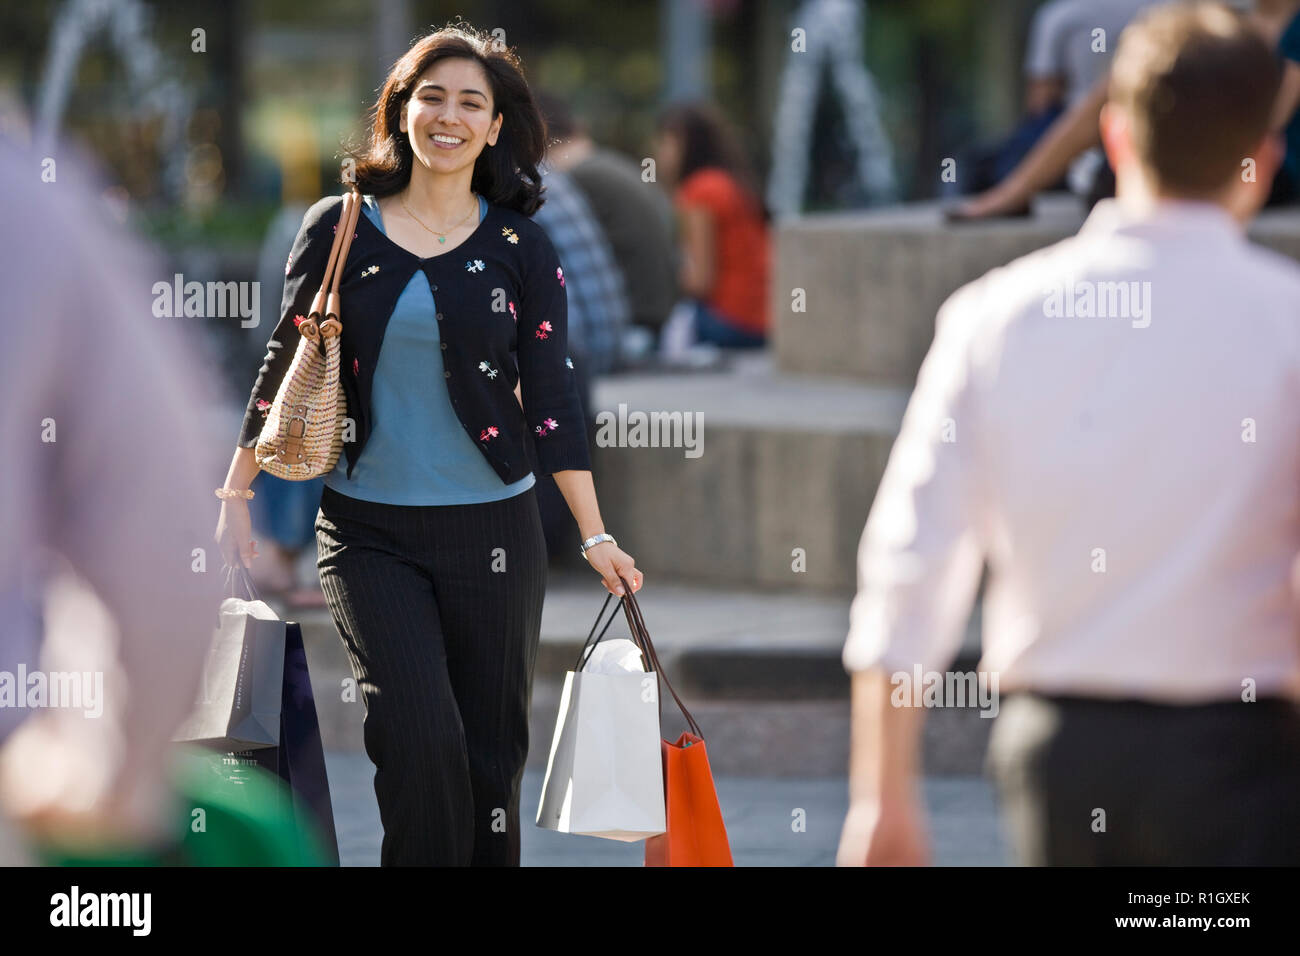 Smiling mid-adult woman carrying shopping bags while walking through the city. Stock Photo